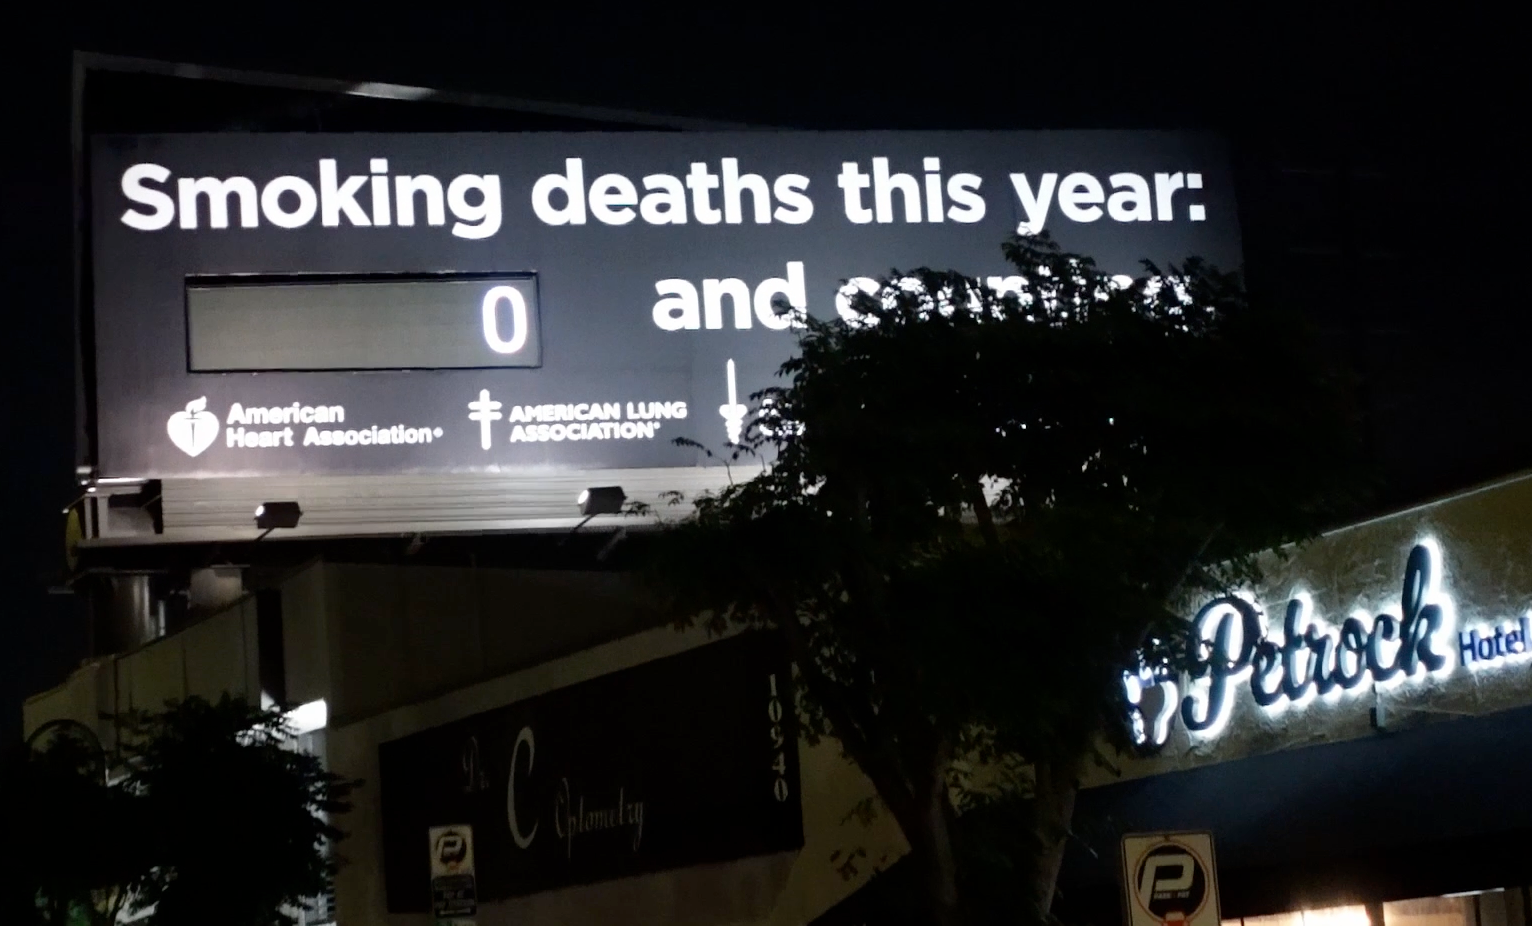 Los Angeles' Smoking Deaths Billboard New Year's Eve Tradition